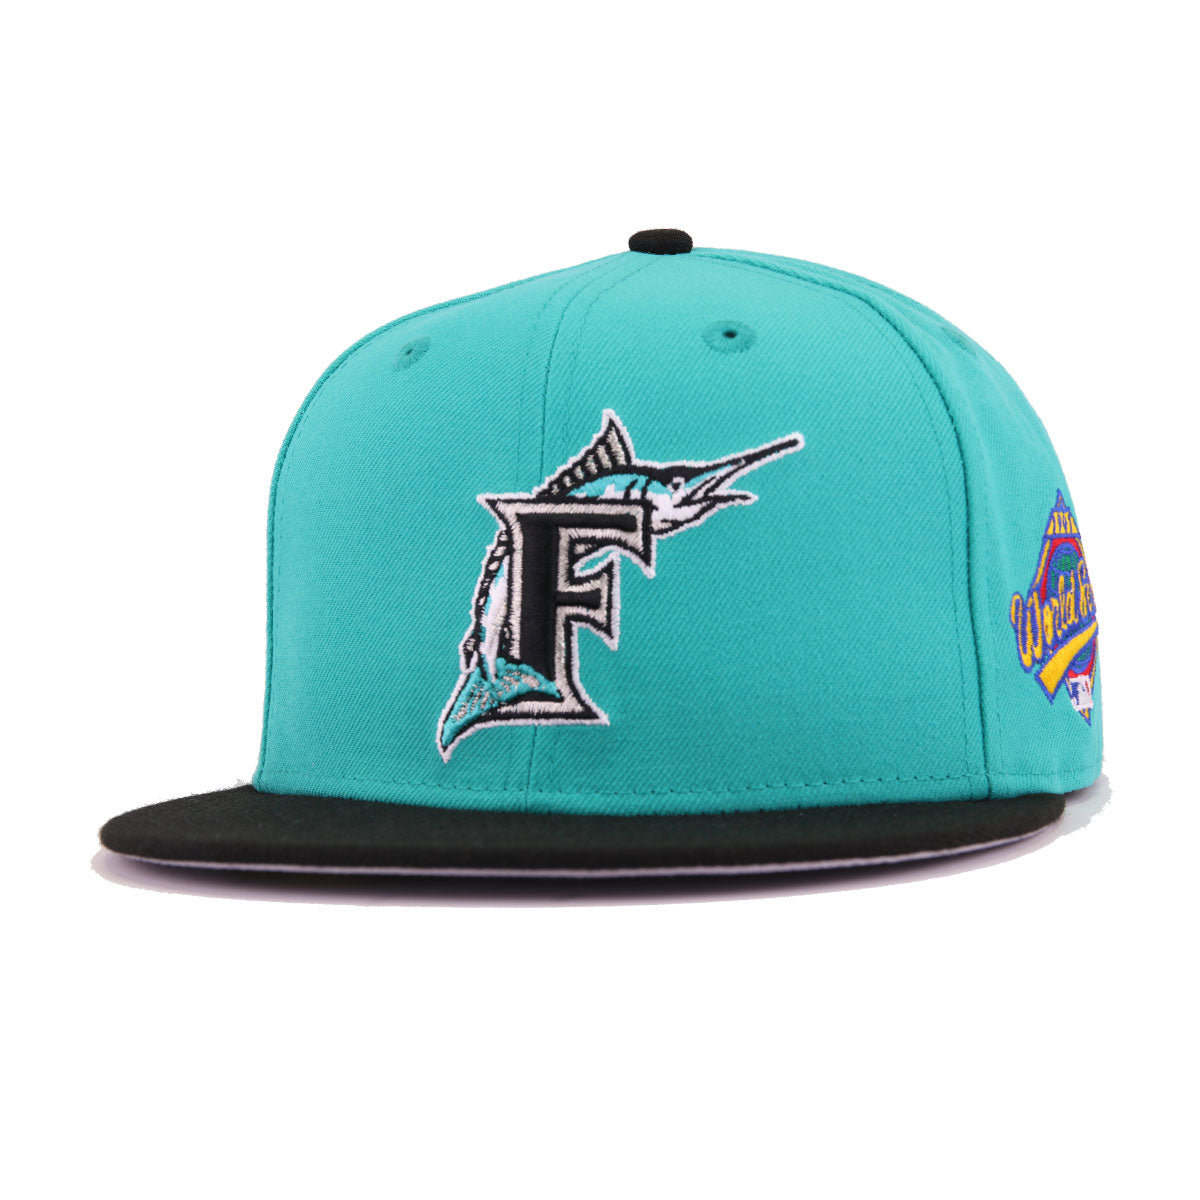 Marlins working teal back into color scheme during 25th